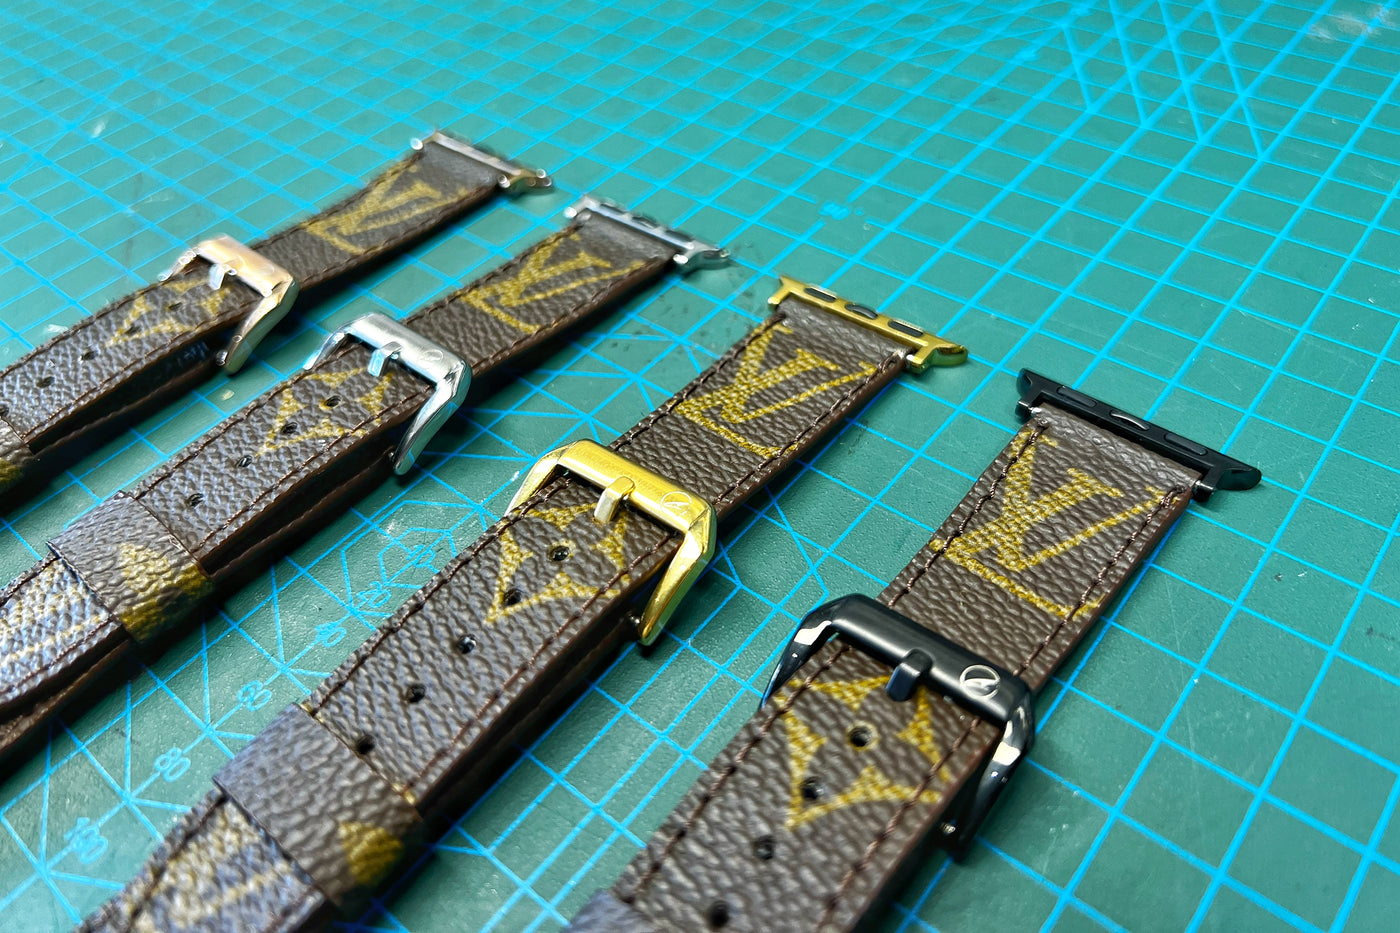 Authentic Louis Vuitton Apple Watch Band -  Canada